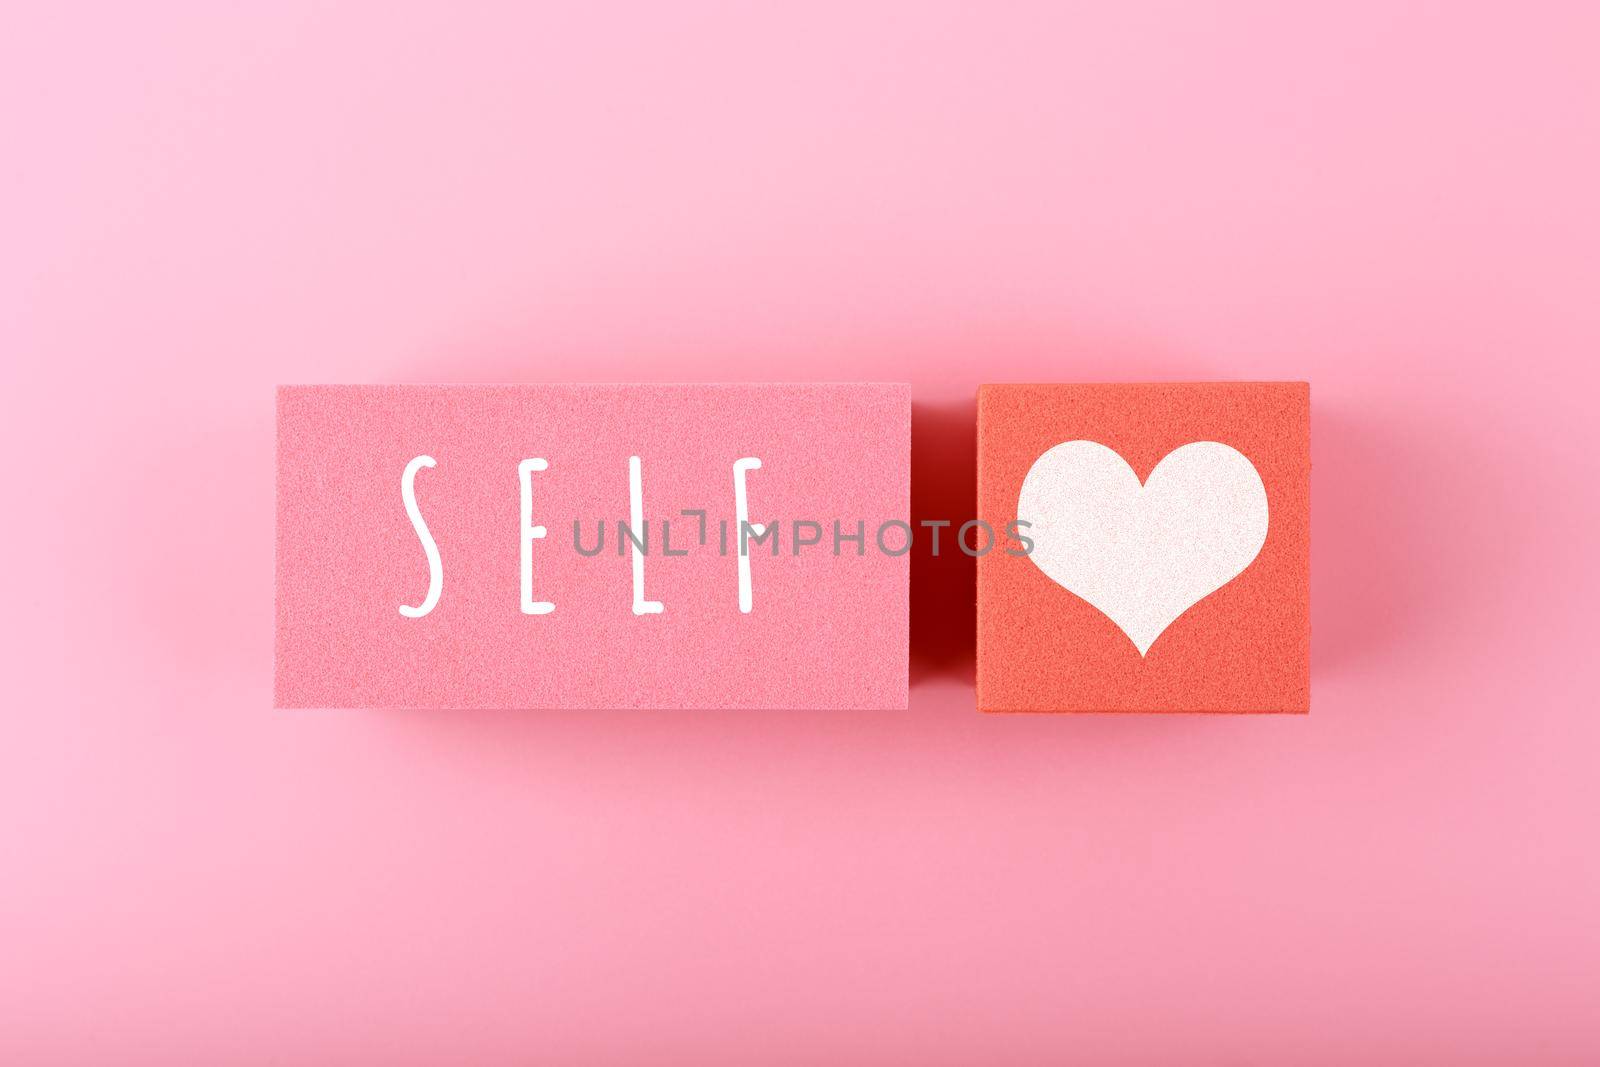 Trendy minimal self love creative concept in pink colors. Mental health, self acceptance, self care and respect or being single concept.